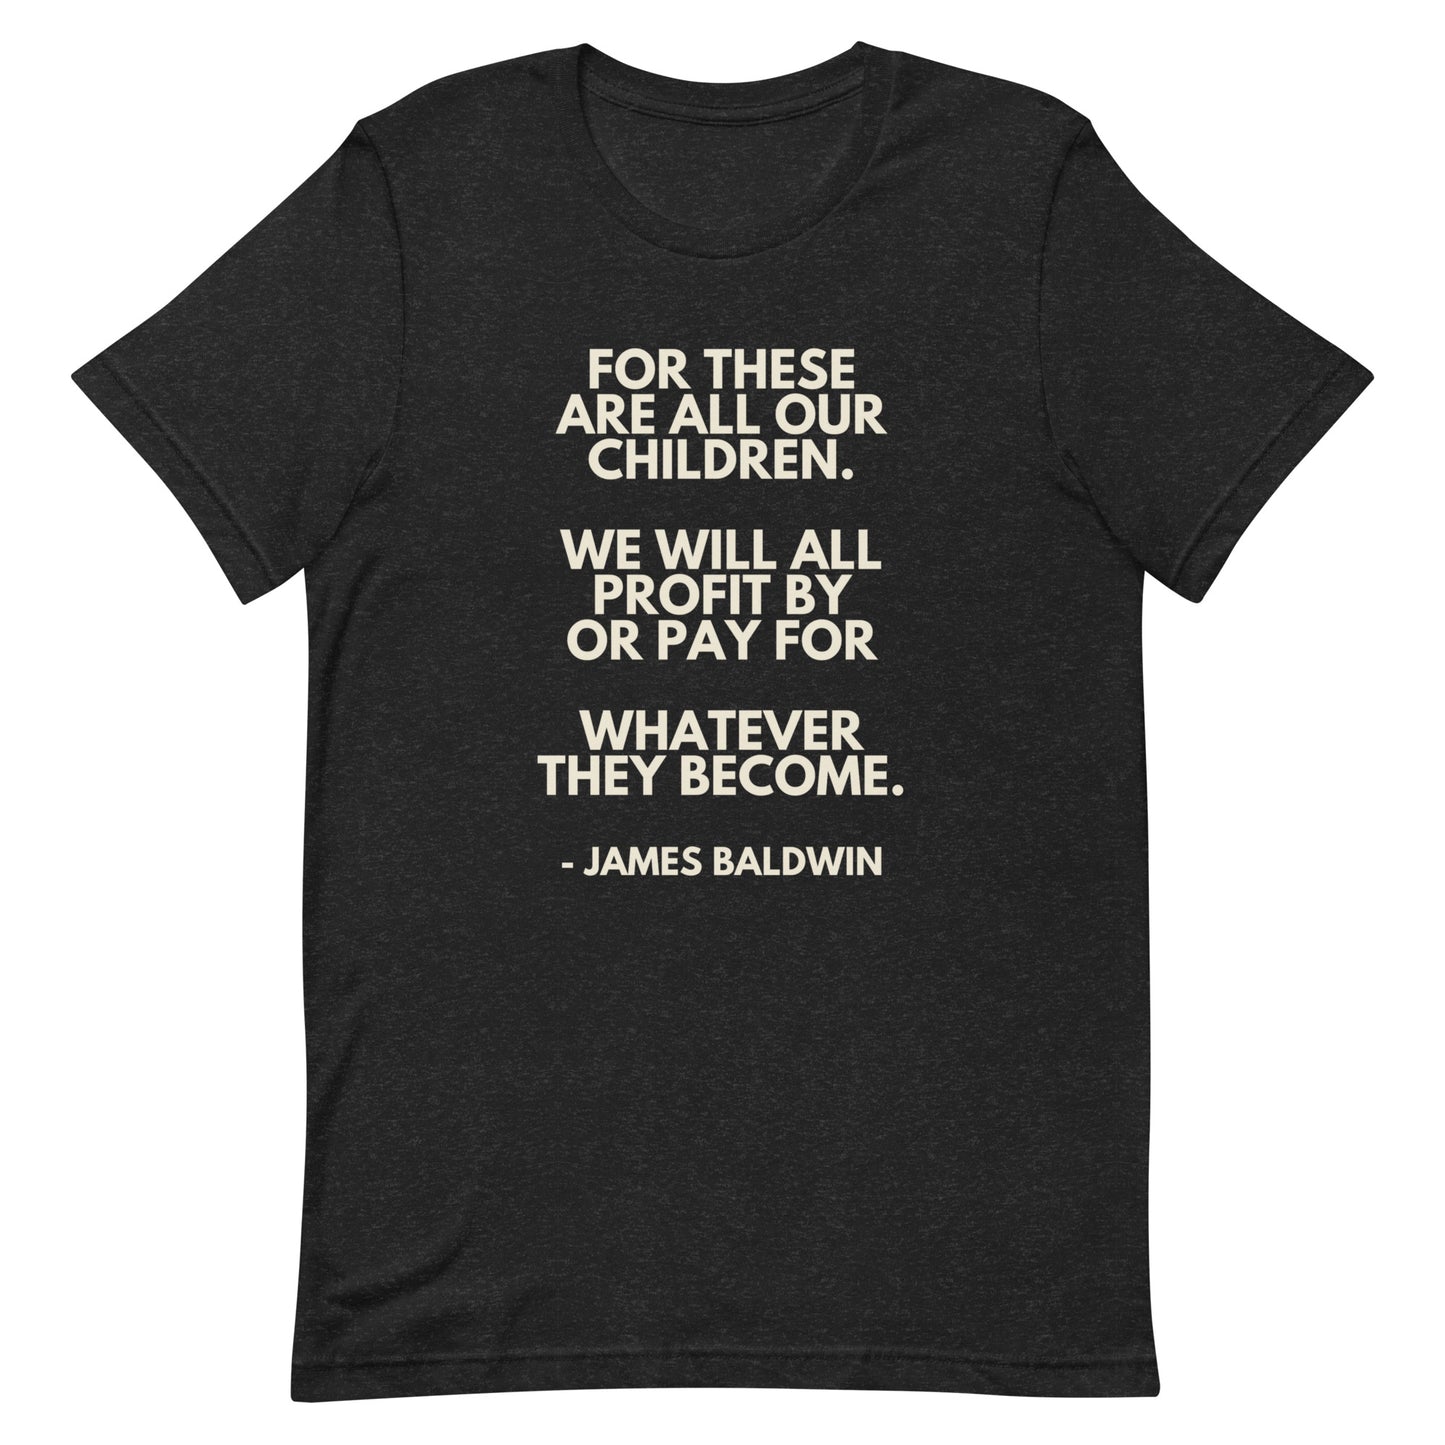 For these are all our children - James Baldwin Tee